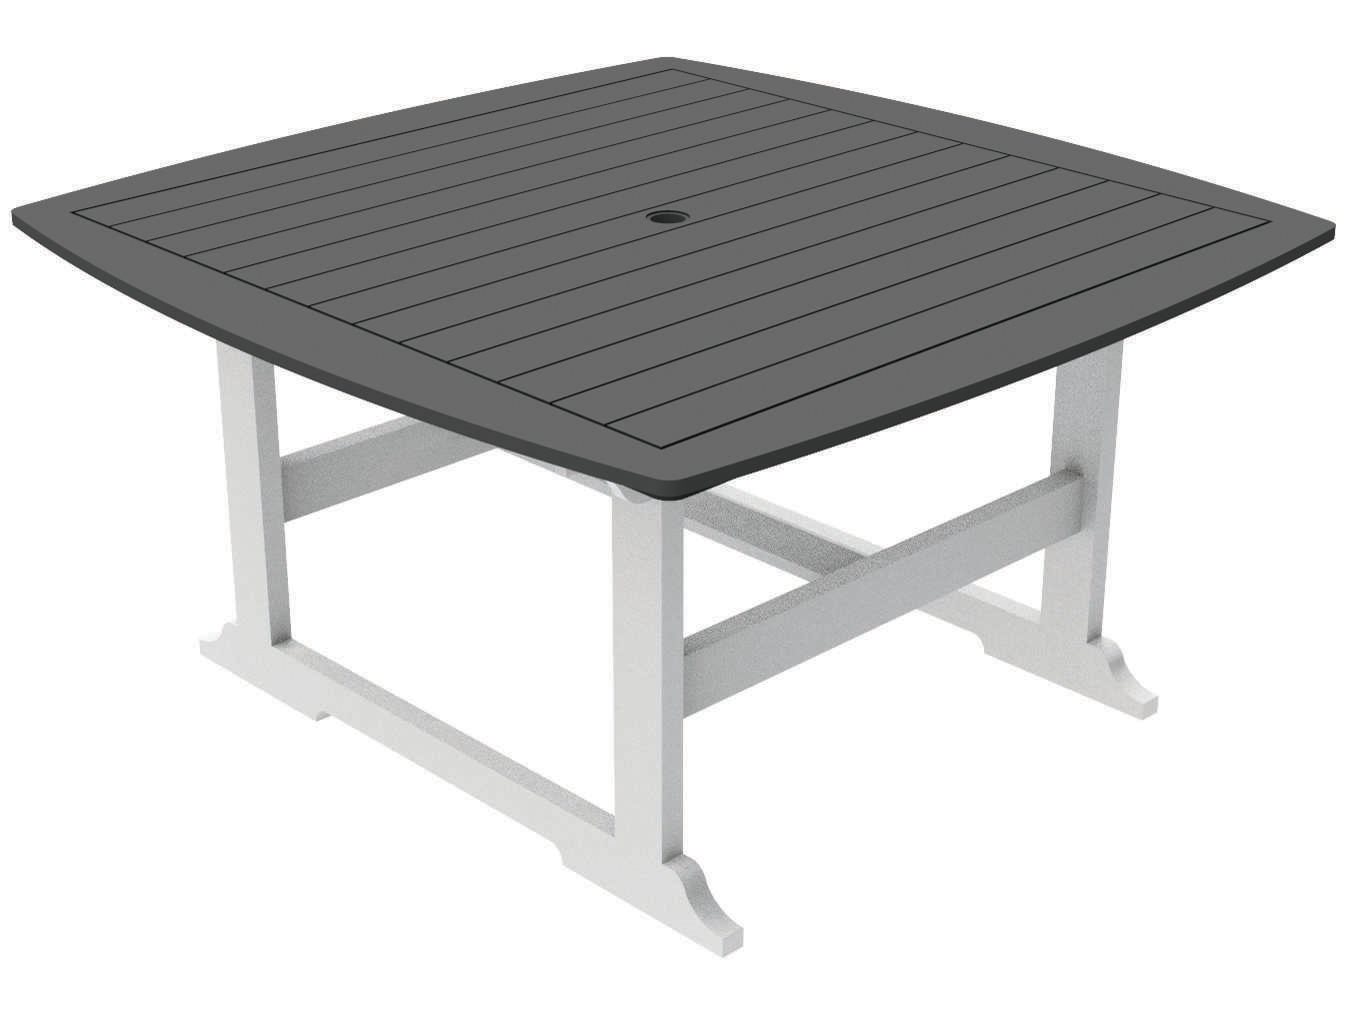 Seaside Casual Portsmouth Recycled Plastic 56 Wide Square Dining Table With Umbrella Hole Ssc046 - Plastic Patio Dining Table With Umbrella Hole